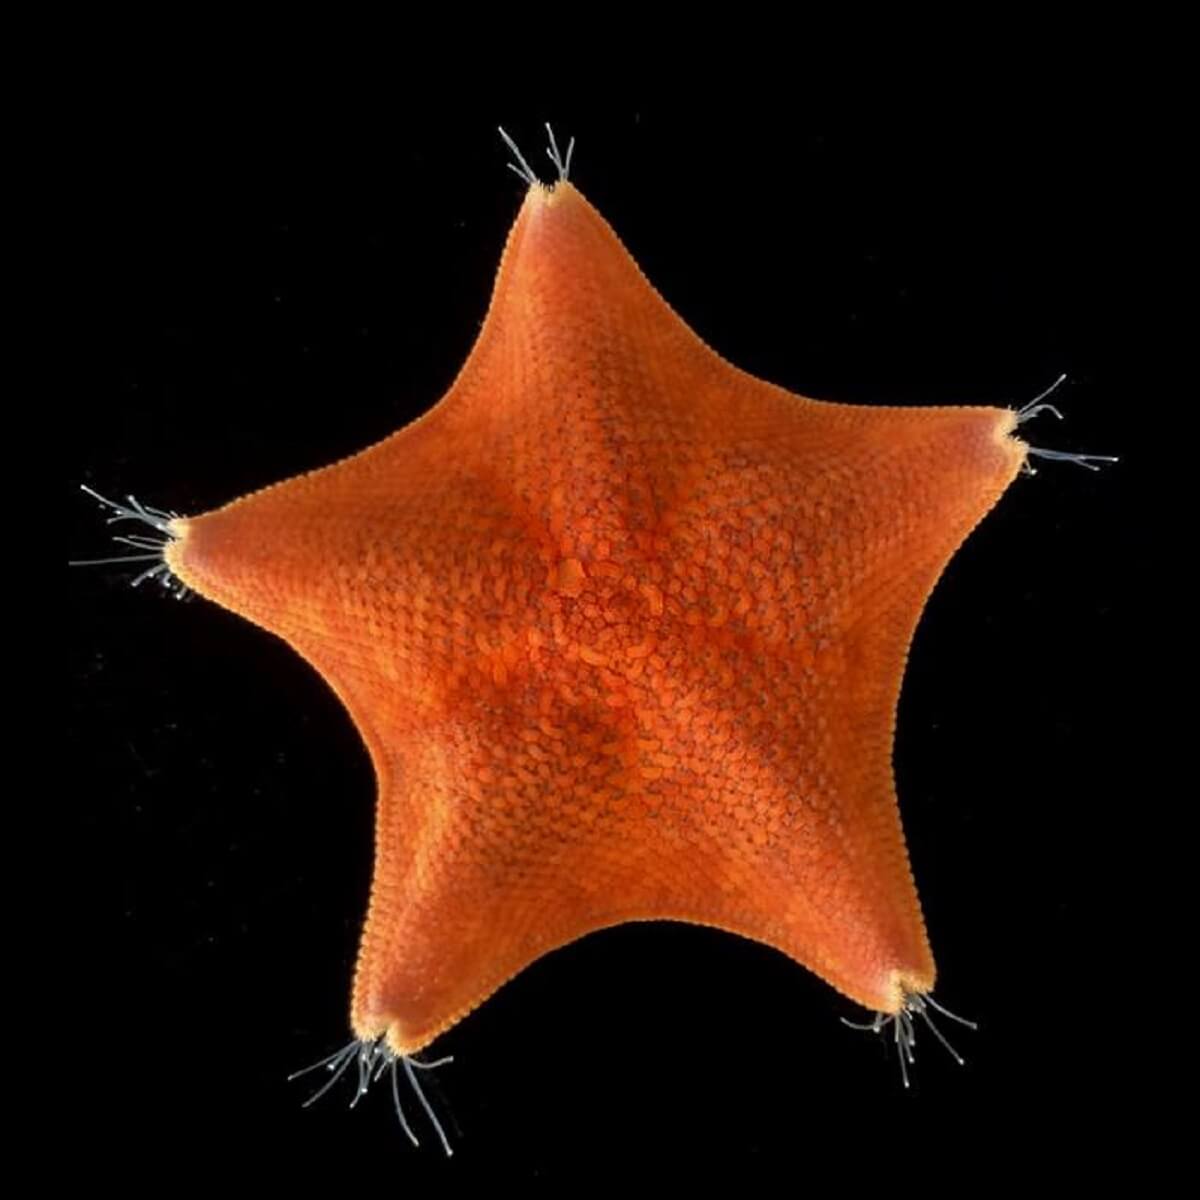 The unusual five-axis symmetry of sea stars (Patiria miniata) has long confounded our understanding of animal evolution.